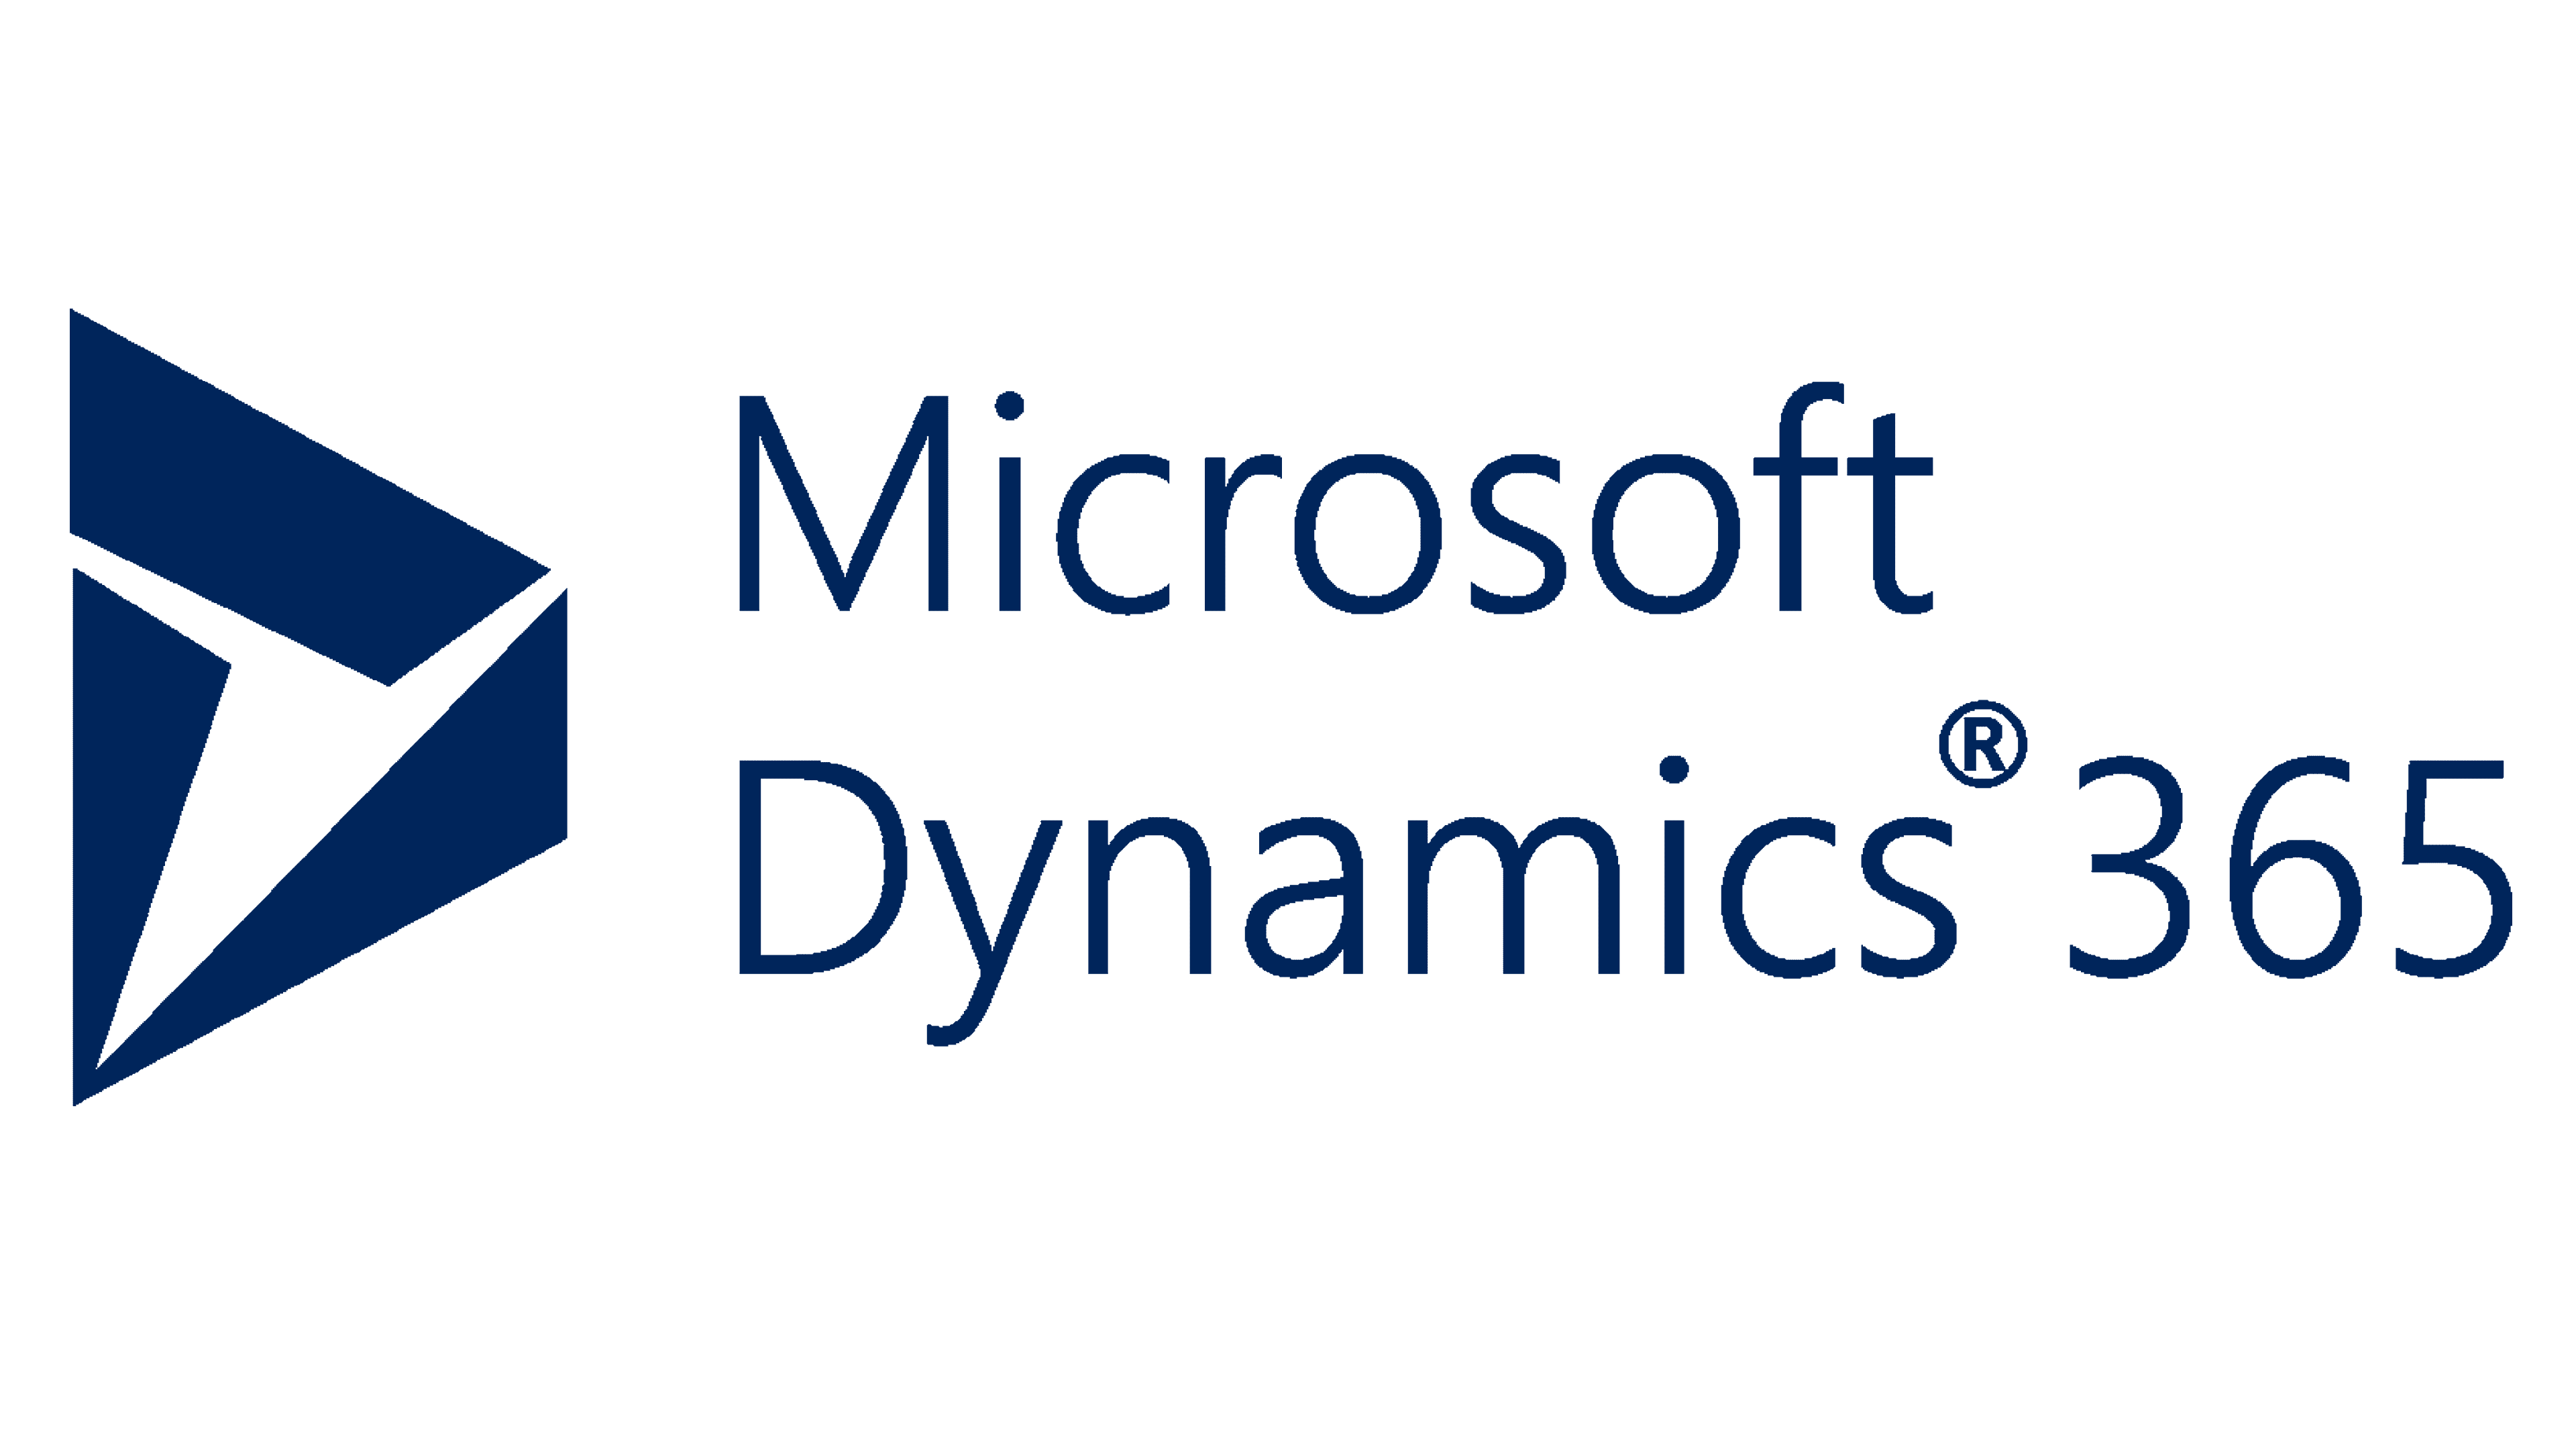 Paramount Consulting offers Microsoft Dynamics 365 customer relationship management Software setup and training for businesses of all sizes.